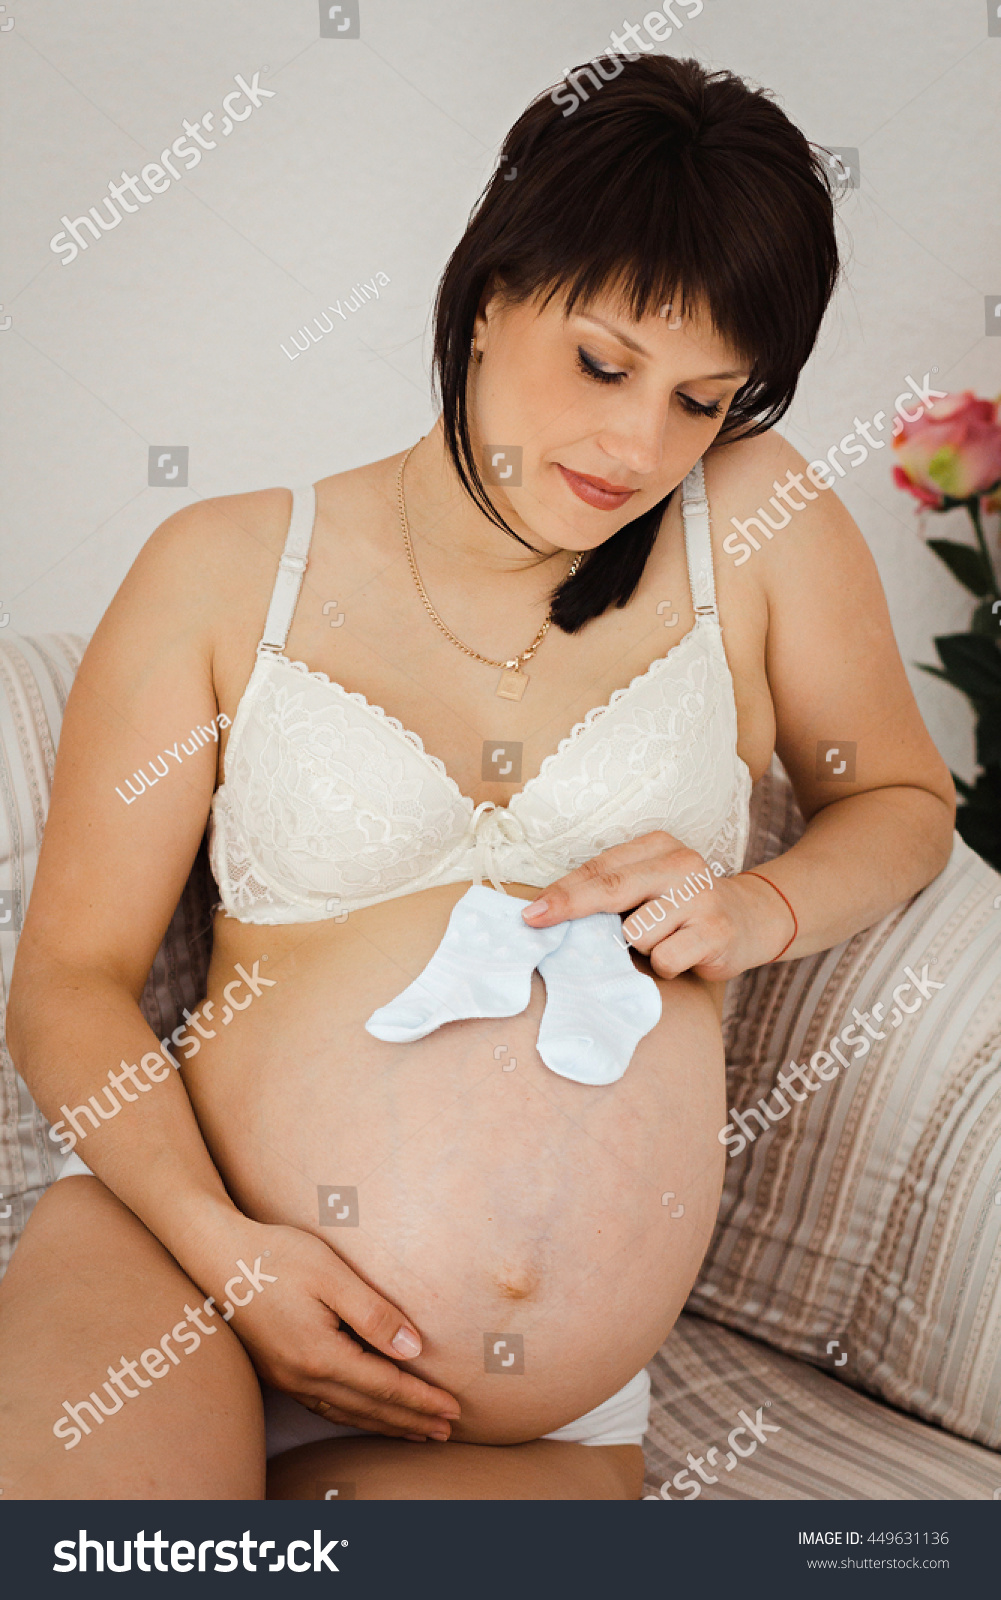 Jobs For Pregnant Woman 2